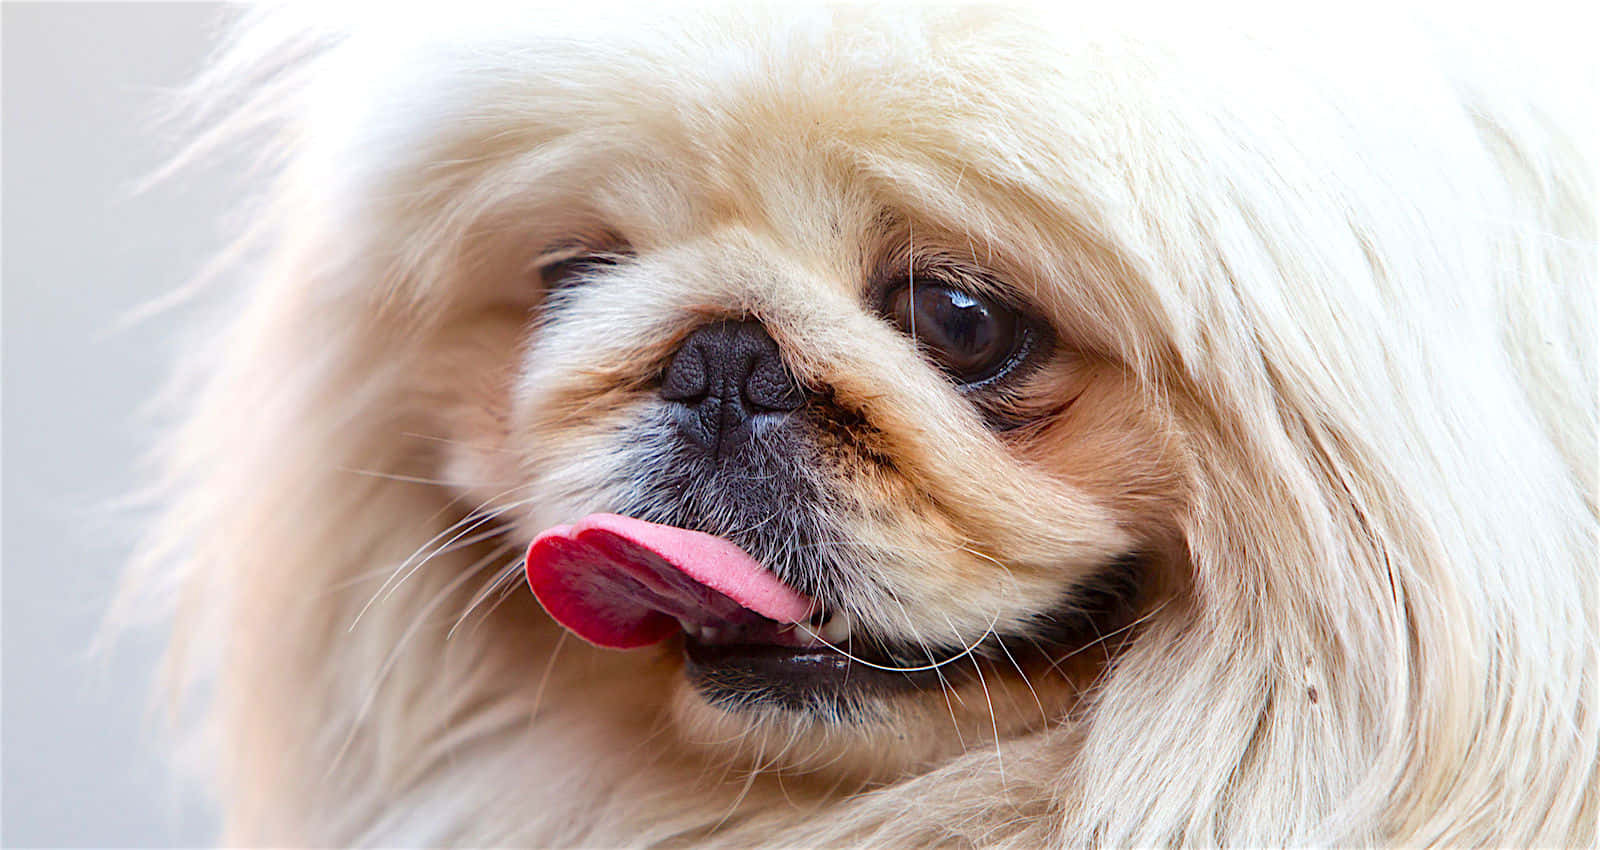 A gorgeous Pekingese pup hangs out on the couch